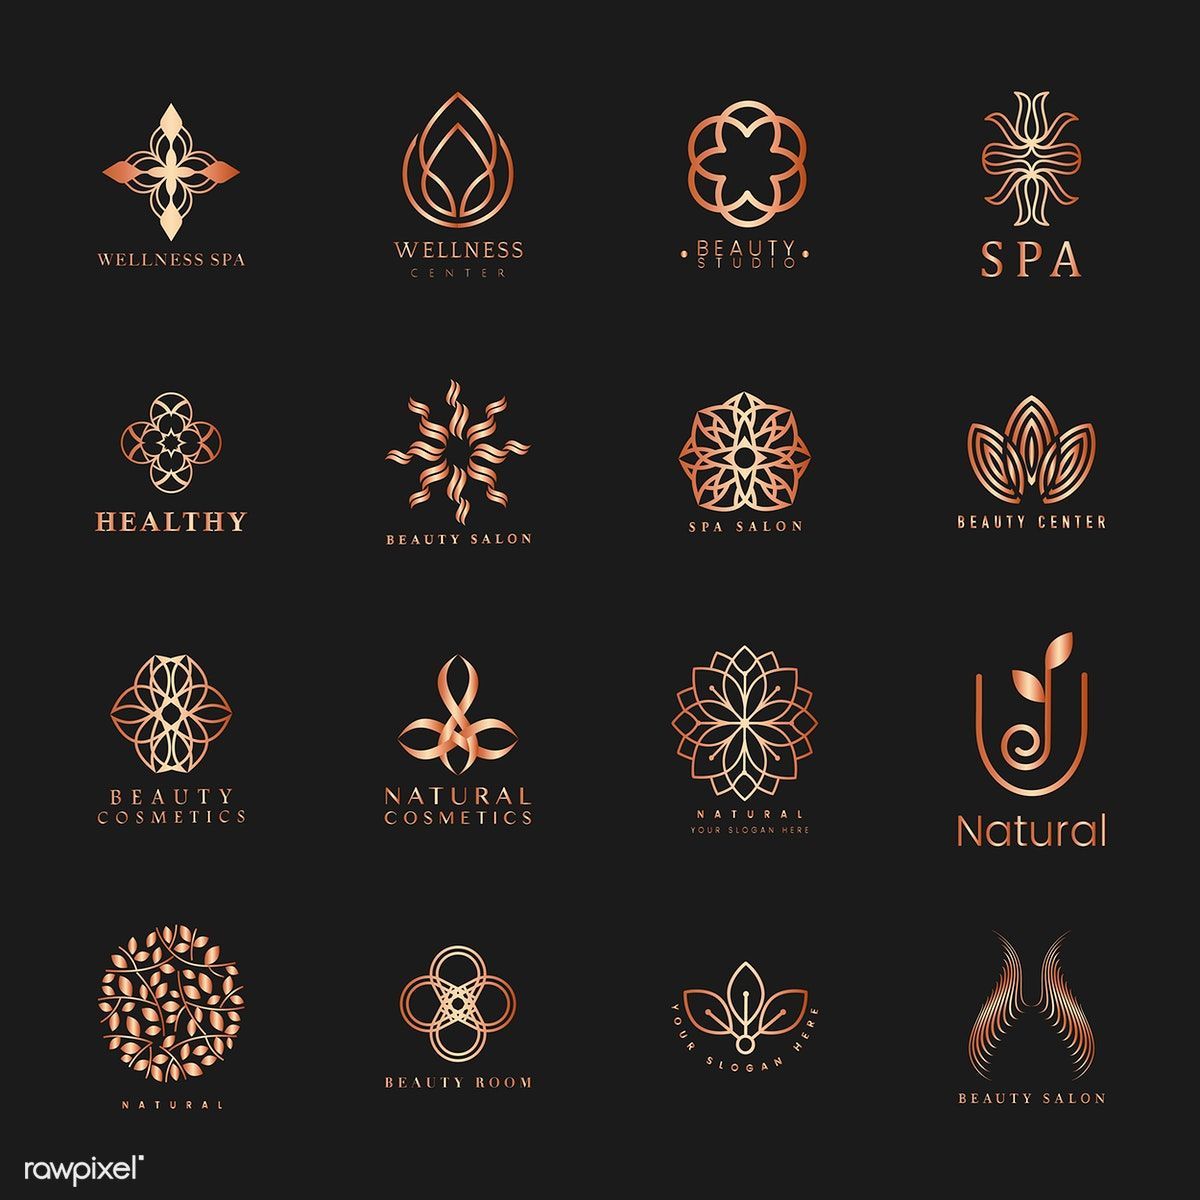 Download premium vector of Set of spa and beauty logo vector 484425 - Download premium vector of Set of spa and beauty logo vector 484425 -   8 beauty Logo vector ideas